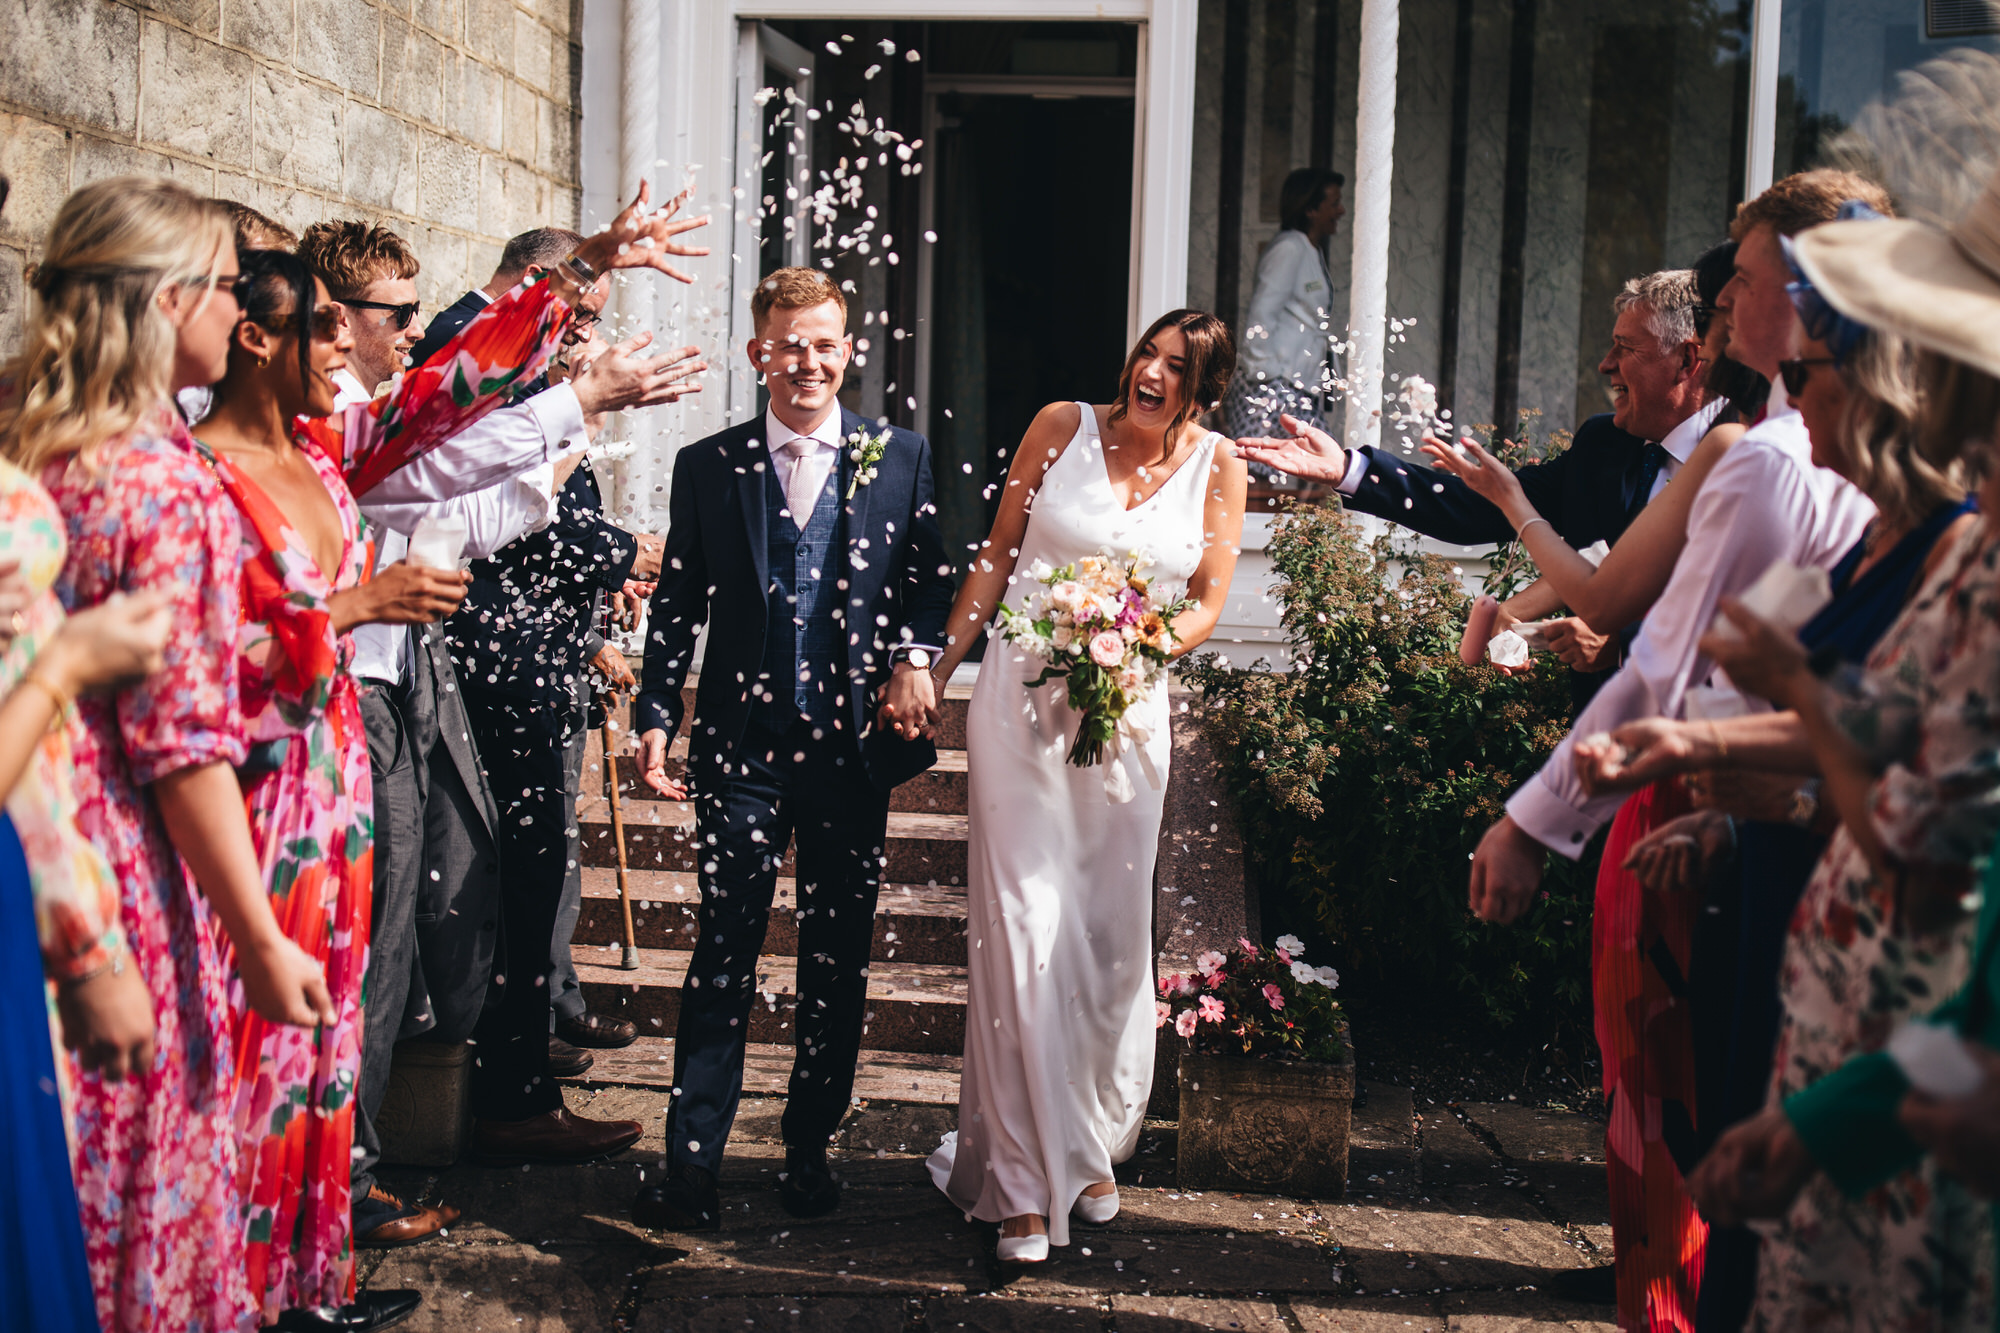 guests throw confetti at bride and groom